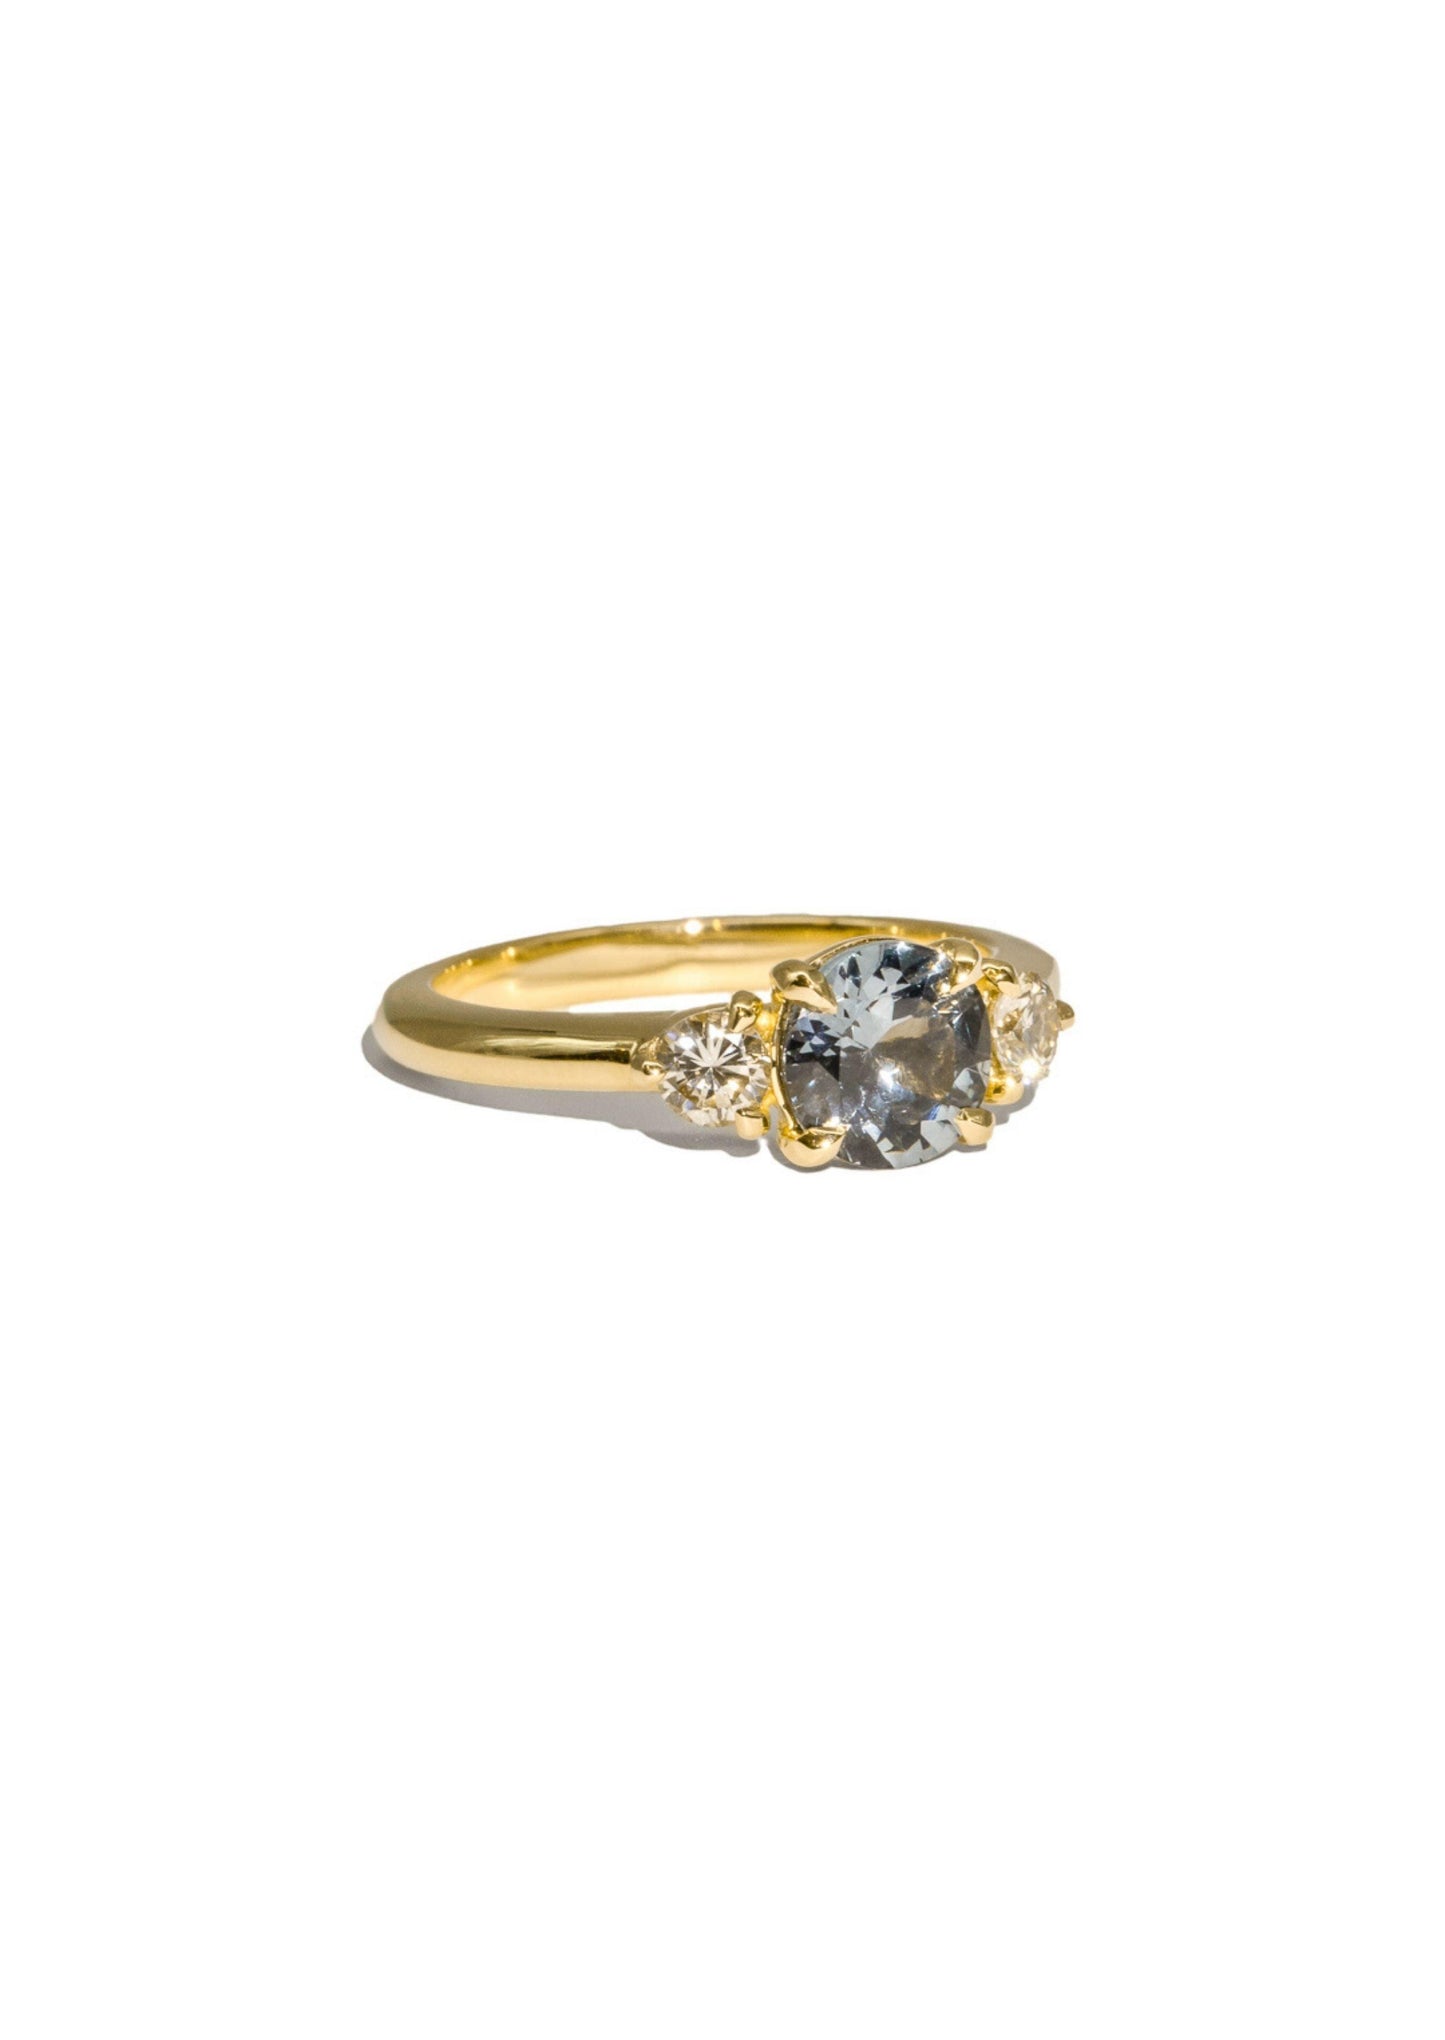 The Ada 1.25ct Spinel Ring